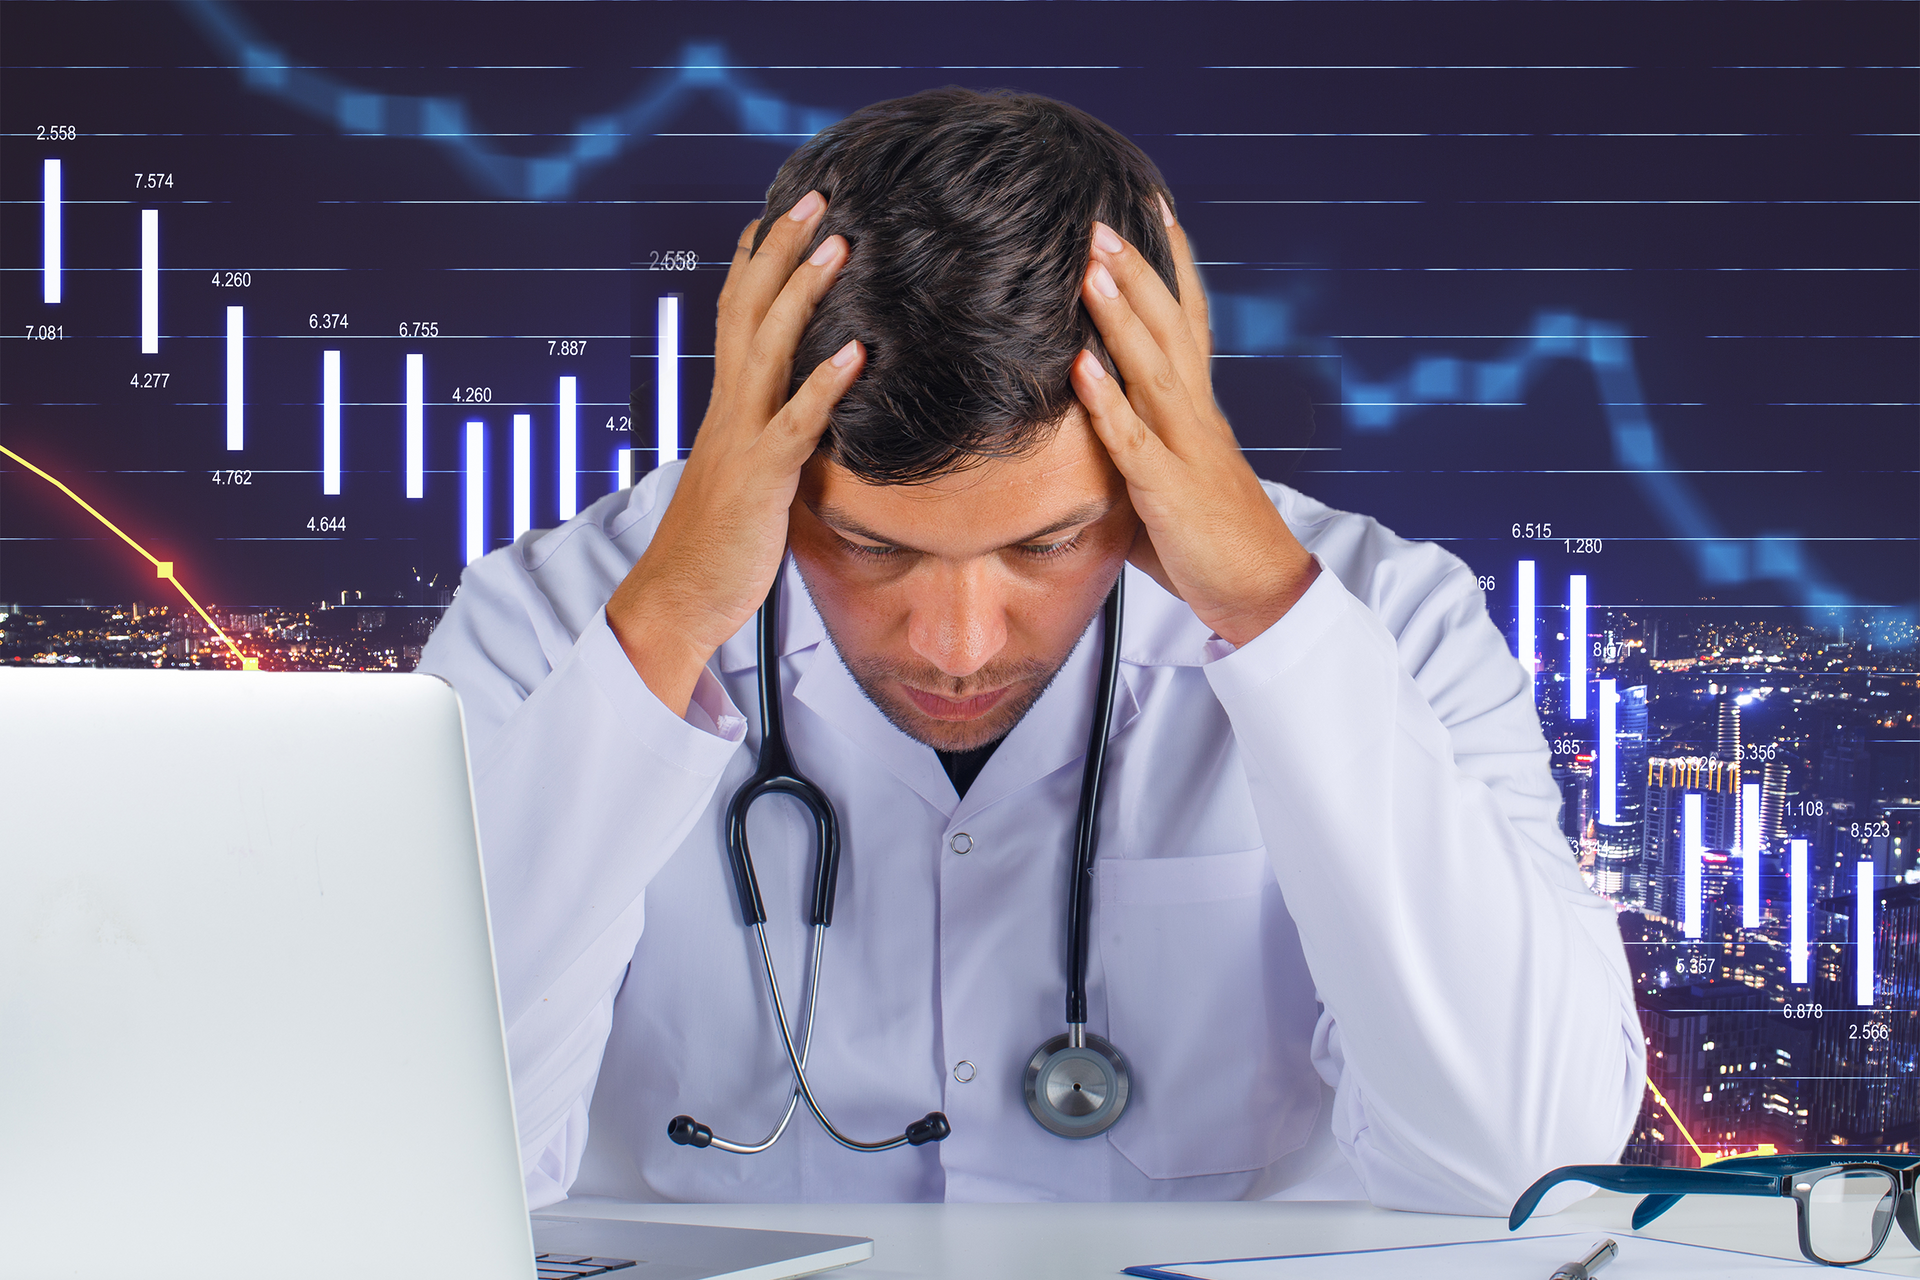 A doctor holding his head in visible distress with a graph serving as a background.